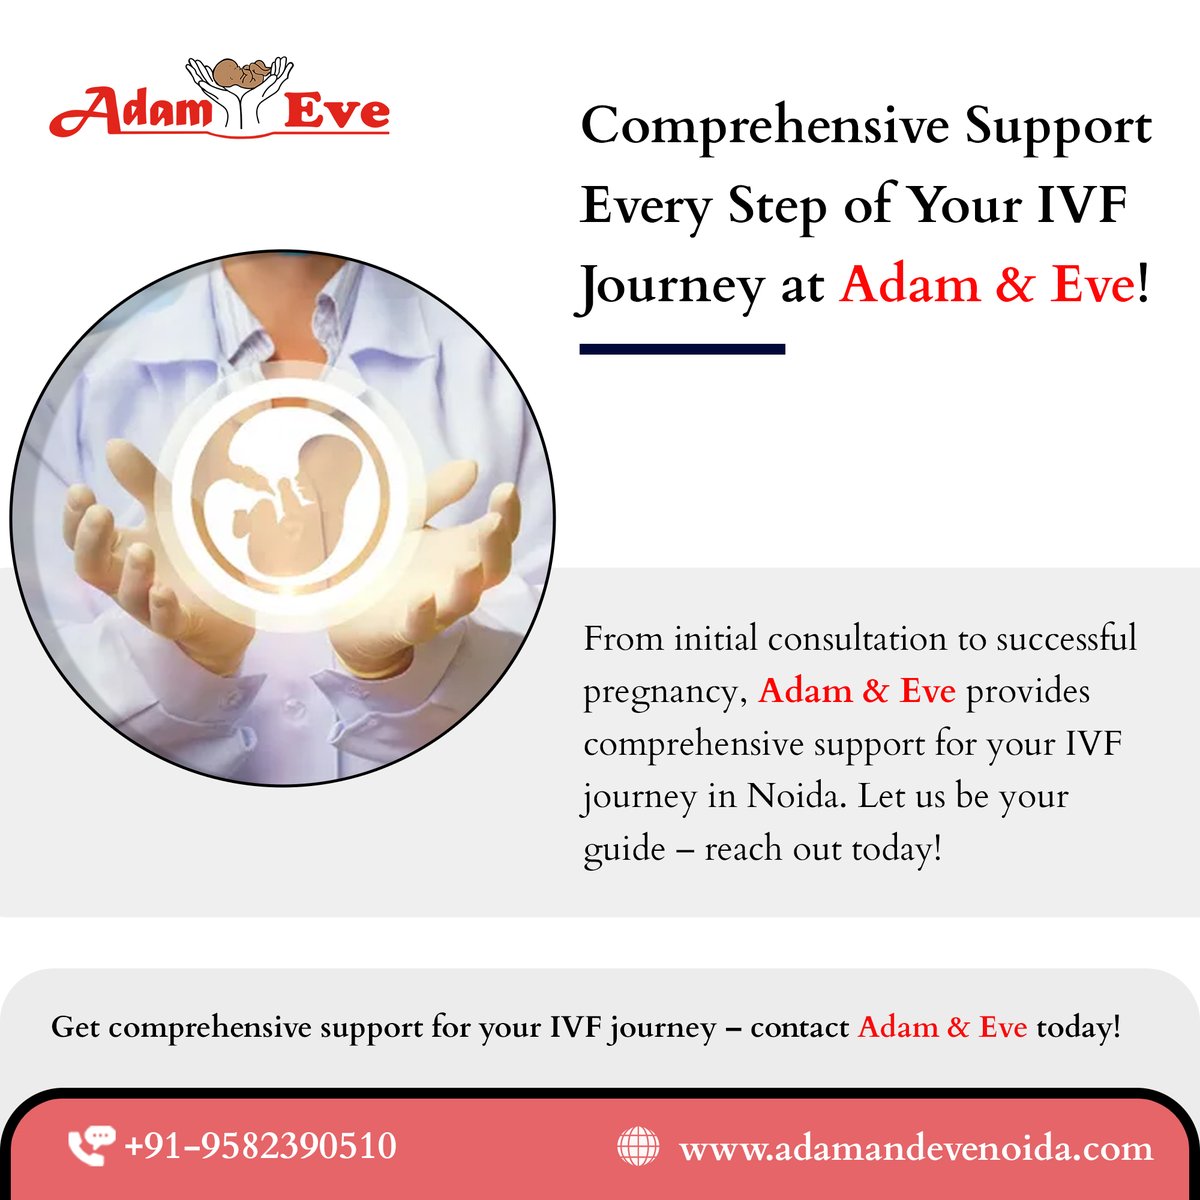 Building your family starts here. #AdamandEveNoida provides comprehensive IVF solutions in a supportive environment. Let's create a miracle together. 
𝗕𝗼𝗼𝗸 𝗬𝗼𝘂𝗿 𝗙𝗶𝗿𝘀𝘁 𝗙𝗿𝗲𝗲 𝗔𝗽𝗽𝗼𝗶𝗻𝘁𝗺𝗲𝗻𝘁
𝗖𝗮𝗹𝗹 +𝟵𝟭-𝟳𝟲𝟲𝟵𝟴𝟬𝟱𝟲𝟬𝟬
#IVFSuccess #NoidaFertility